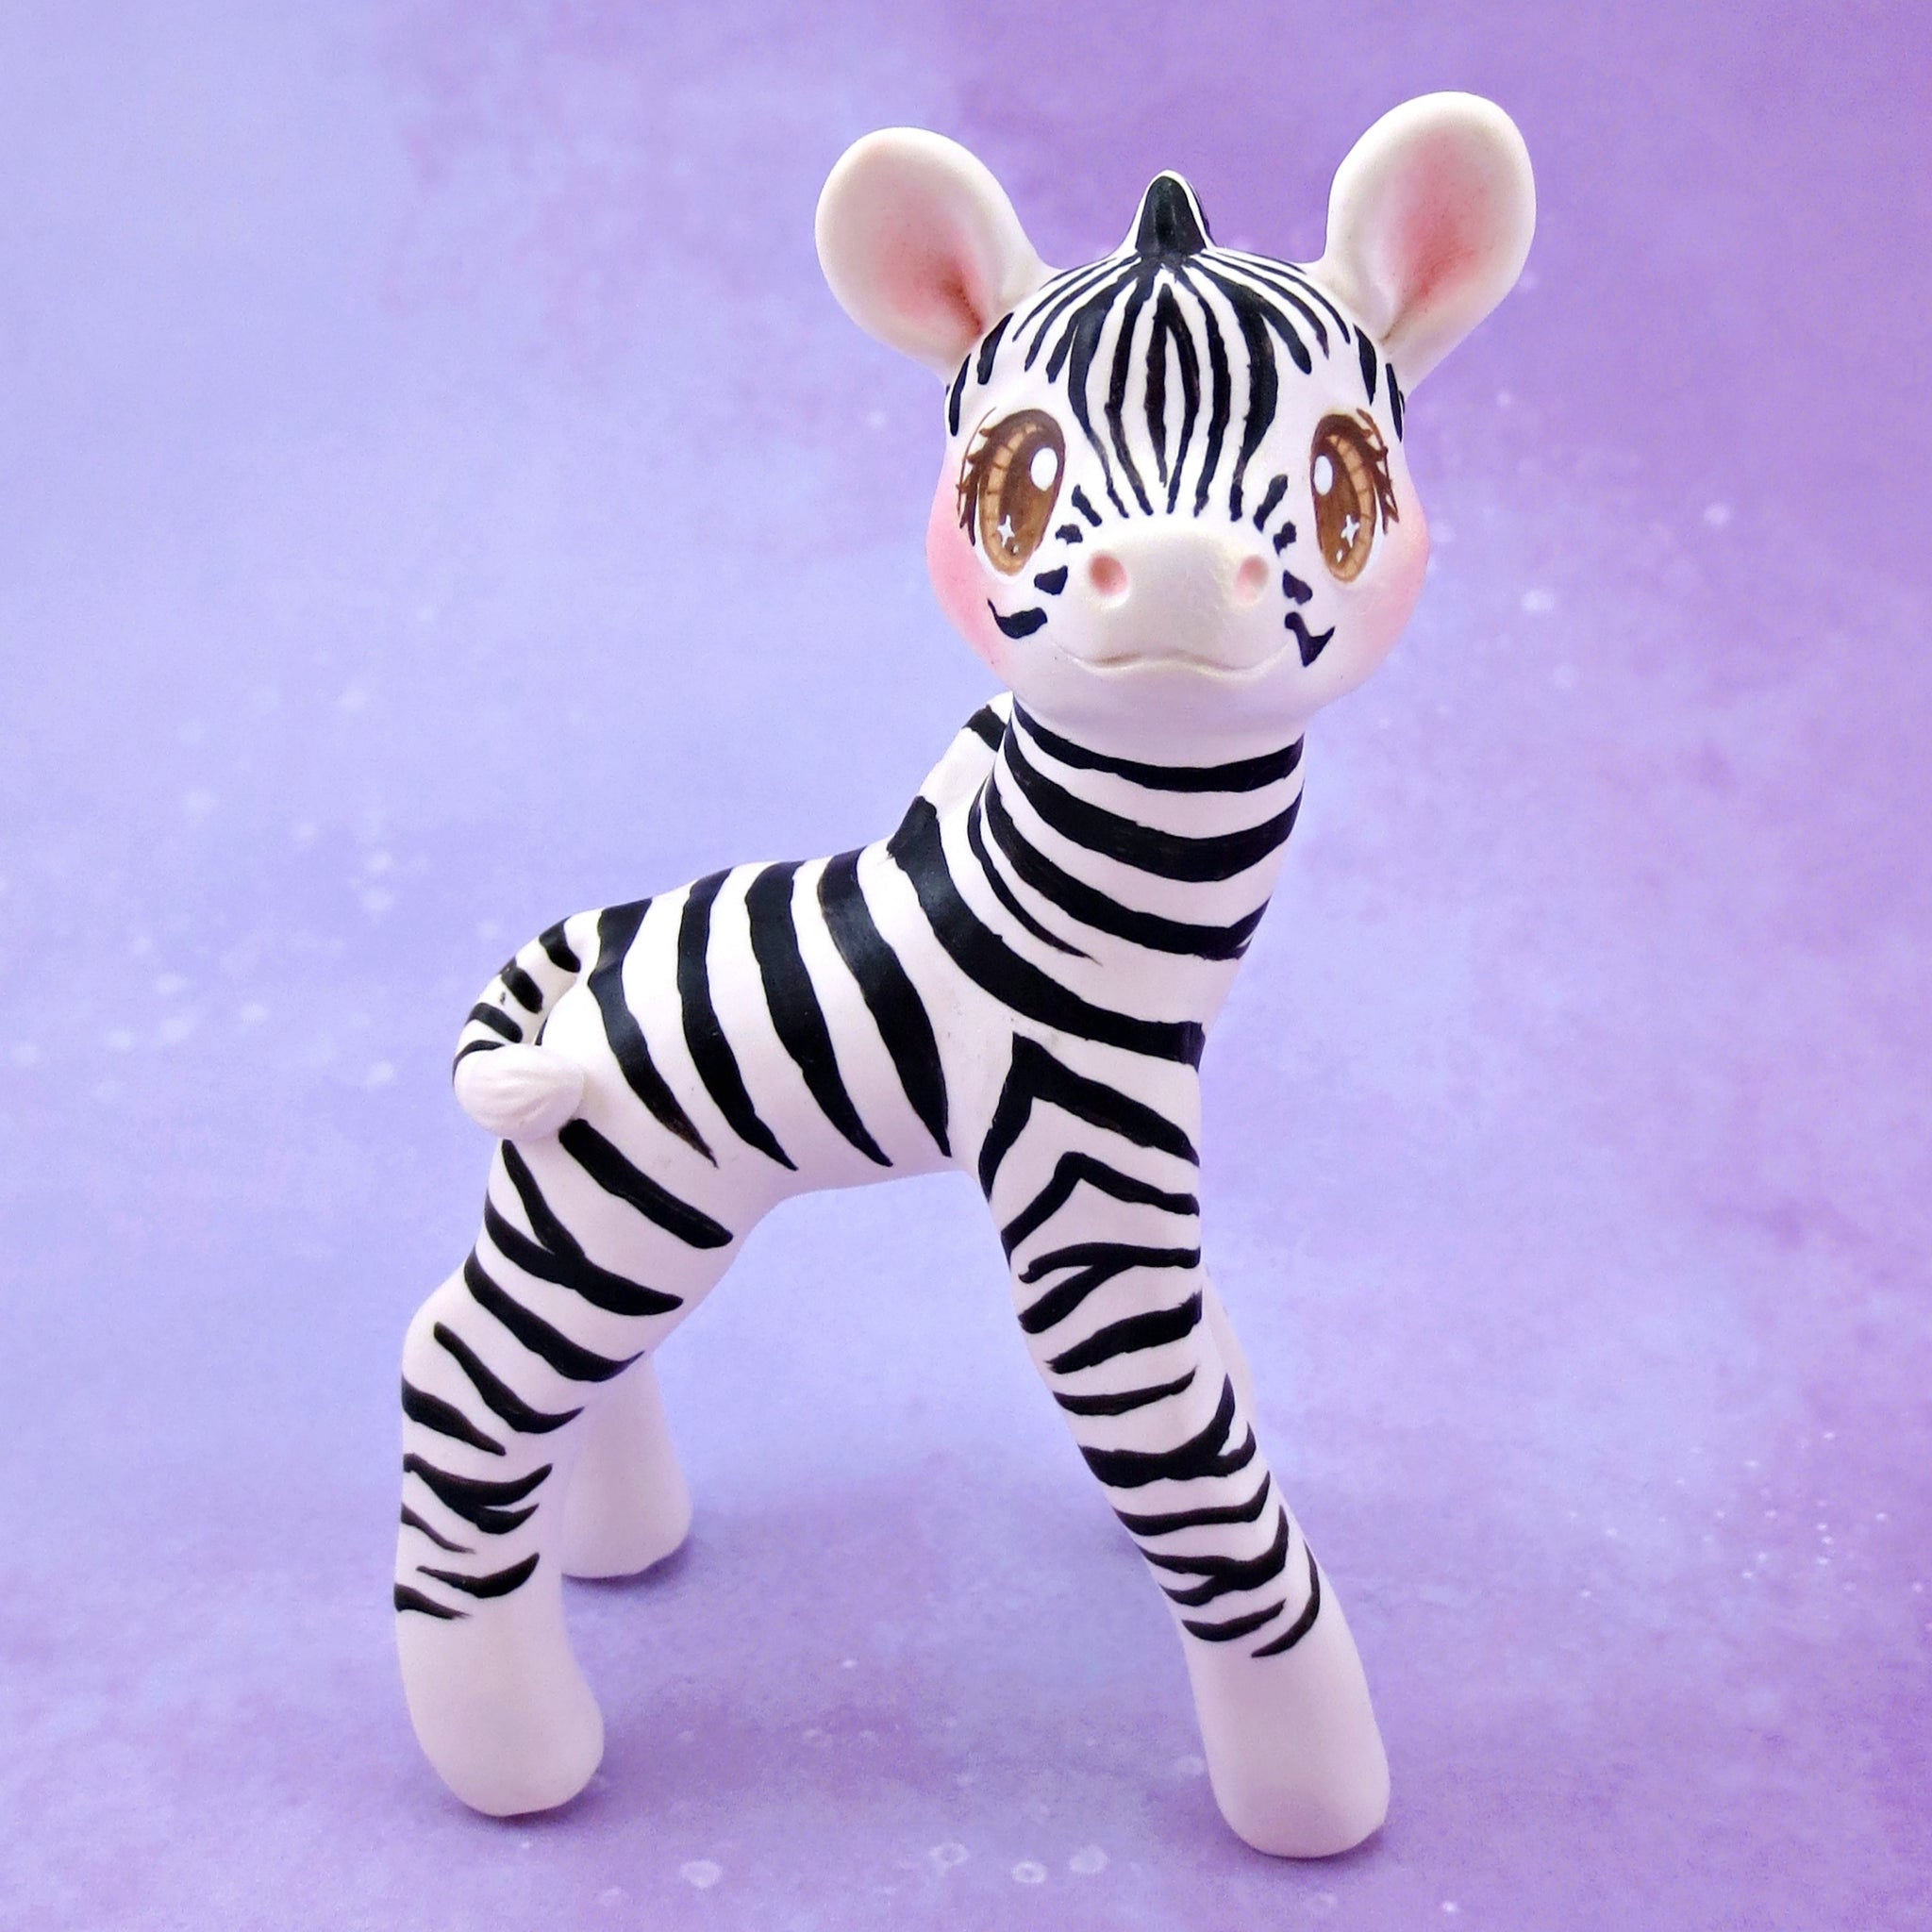 Zebra Figurine - Polymer Clay Animals Continents Collection – Narwhal  Carousel Co.